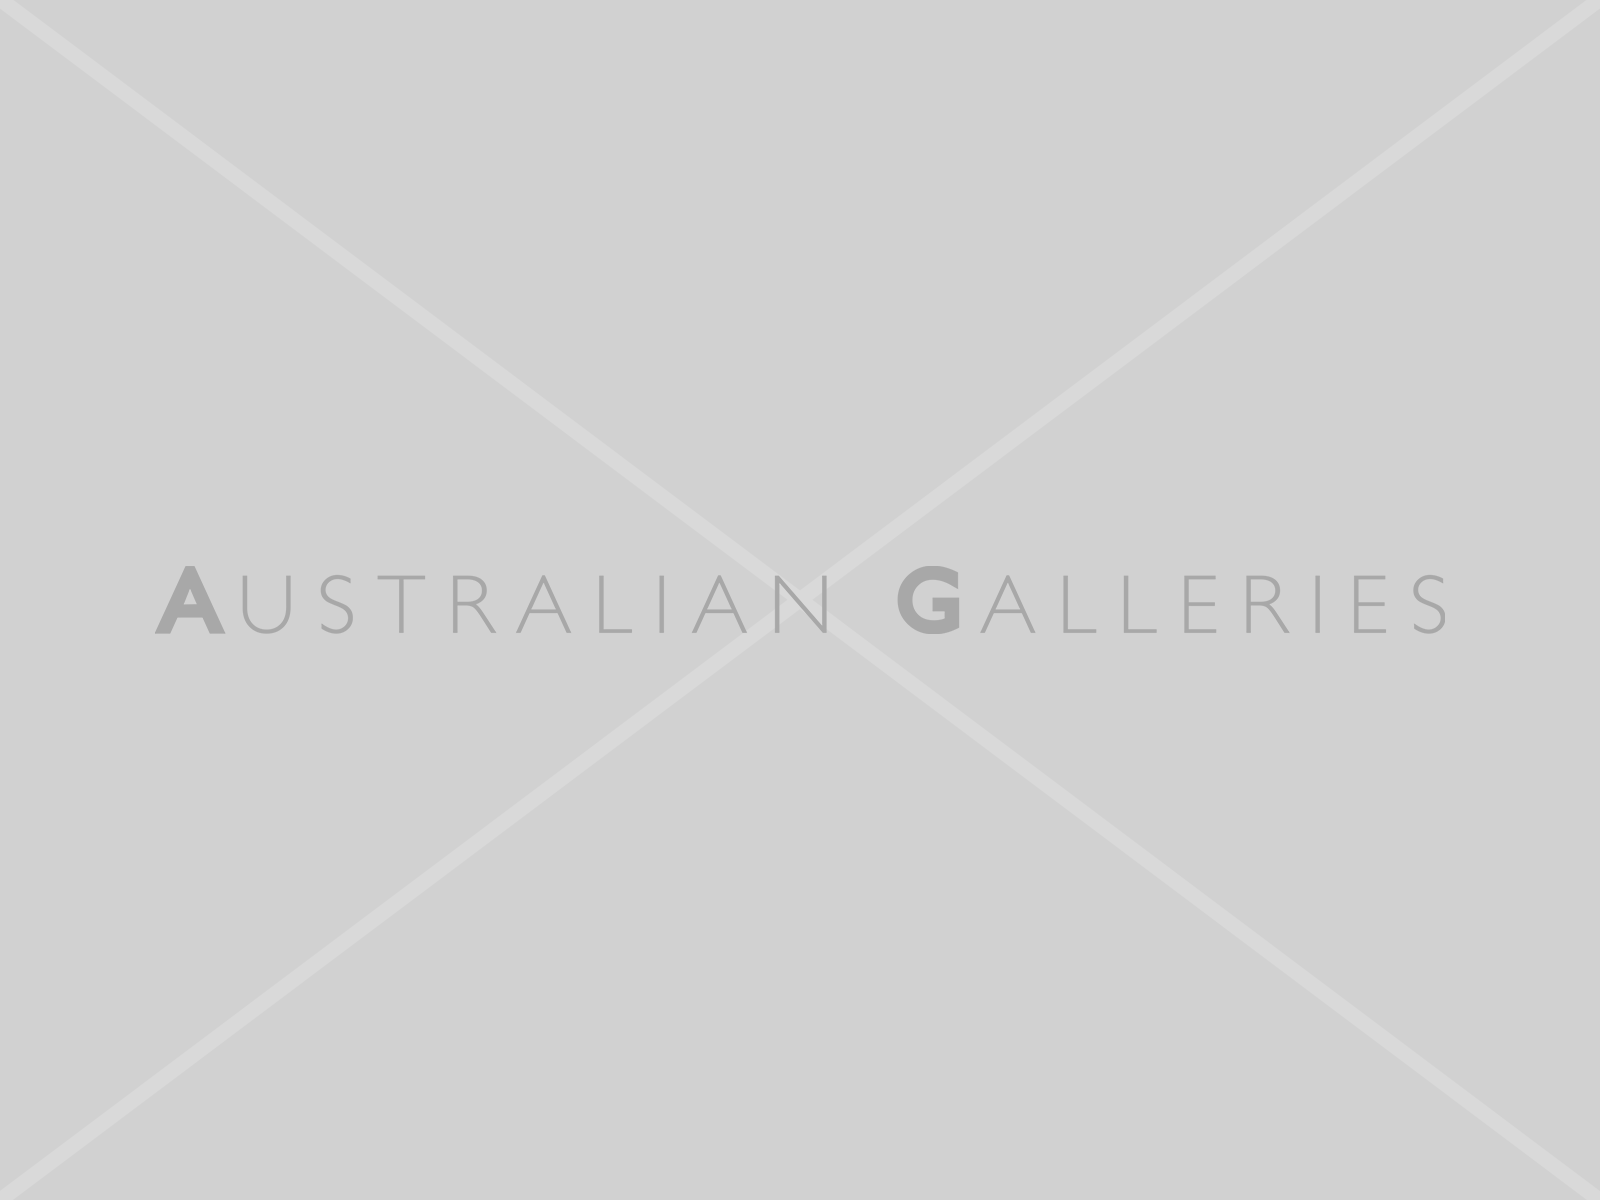 Glenn Morgan and Jenny Rodgerson – Finalists in the Darling Portrait Prize 2022.